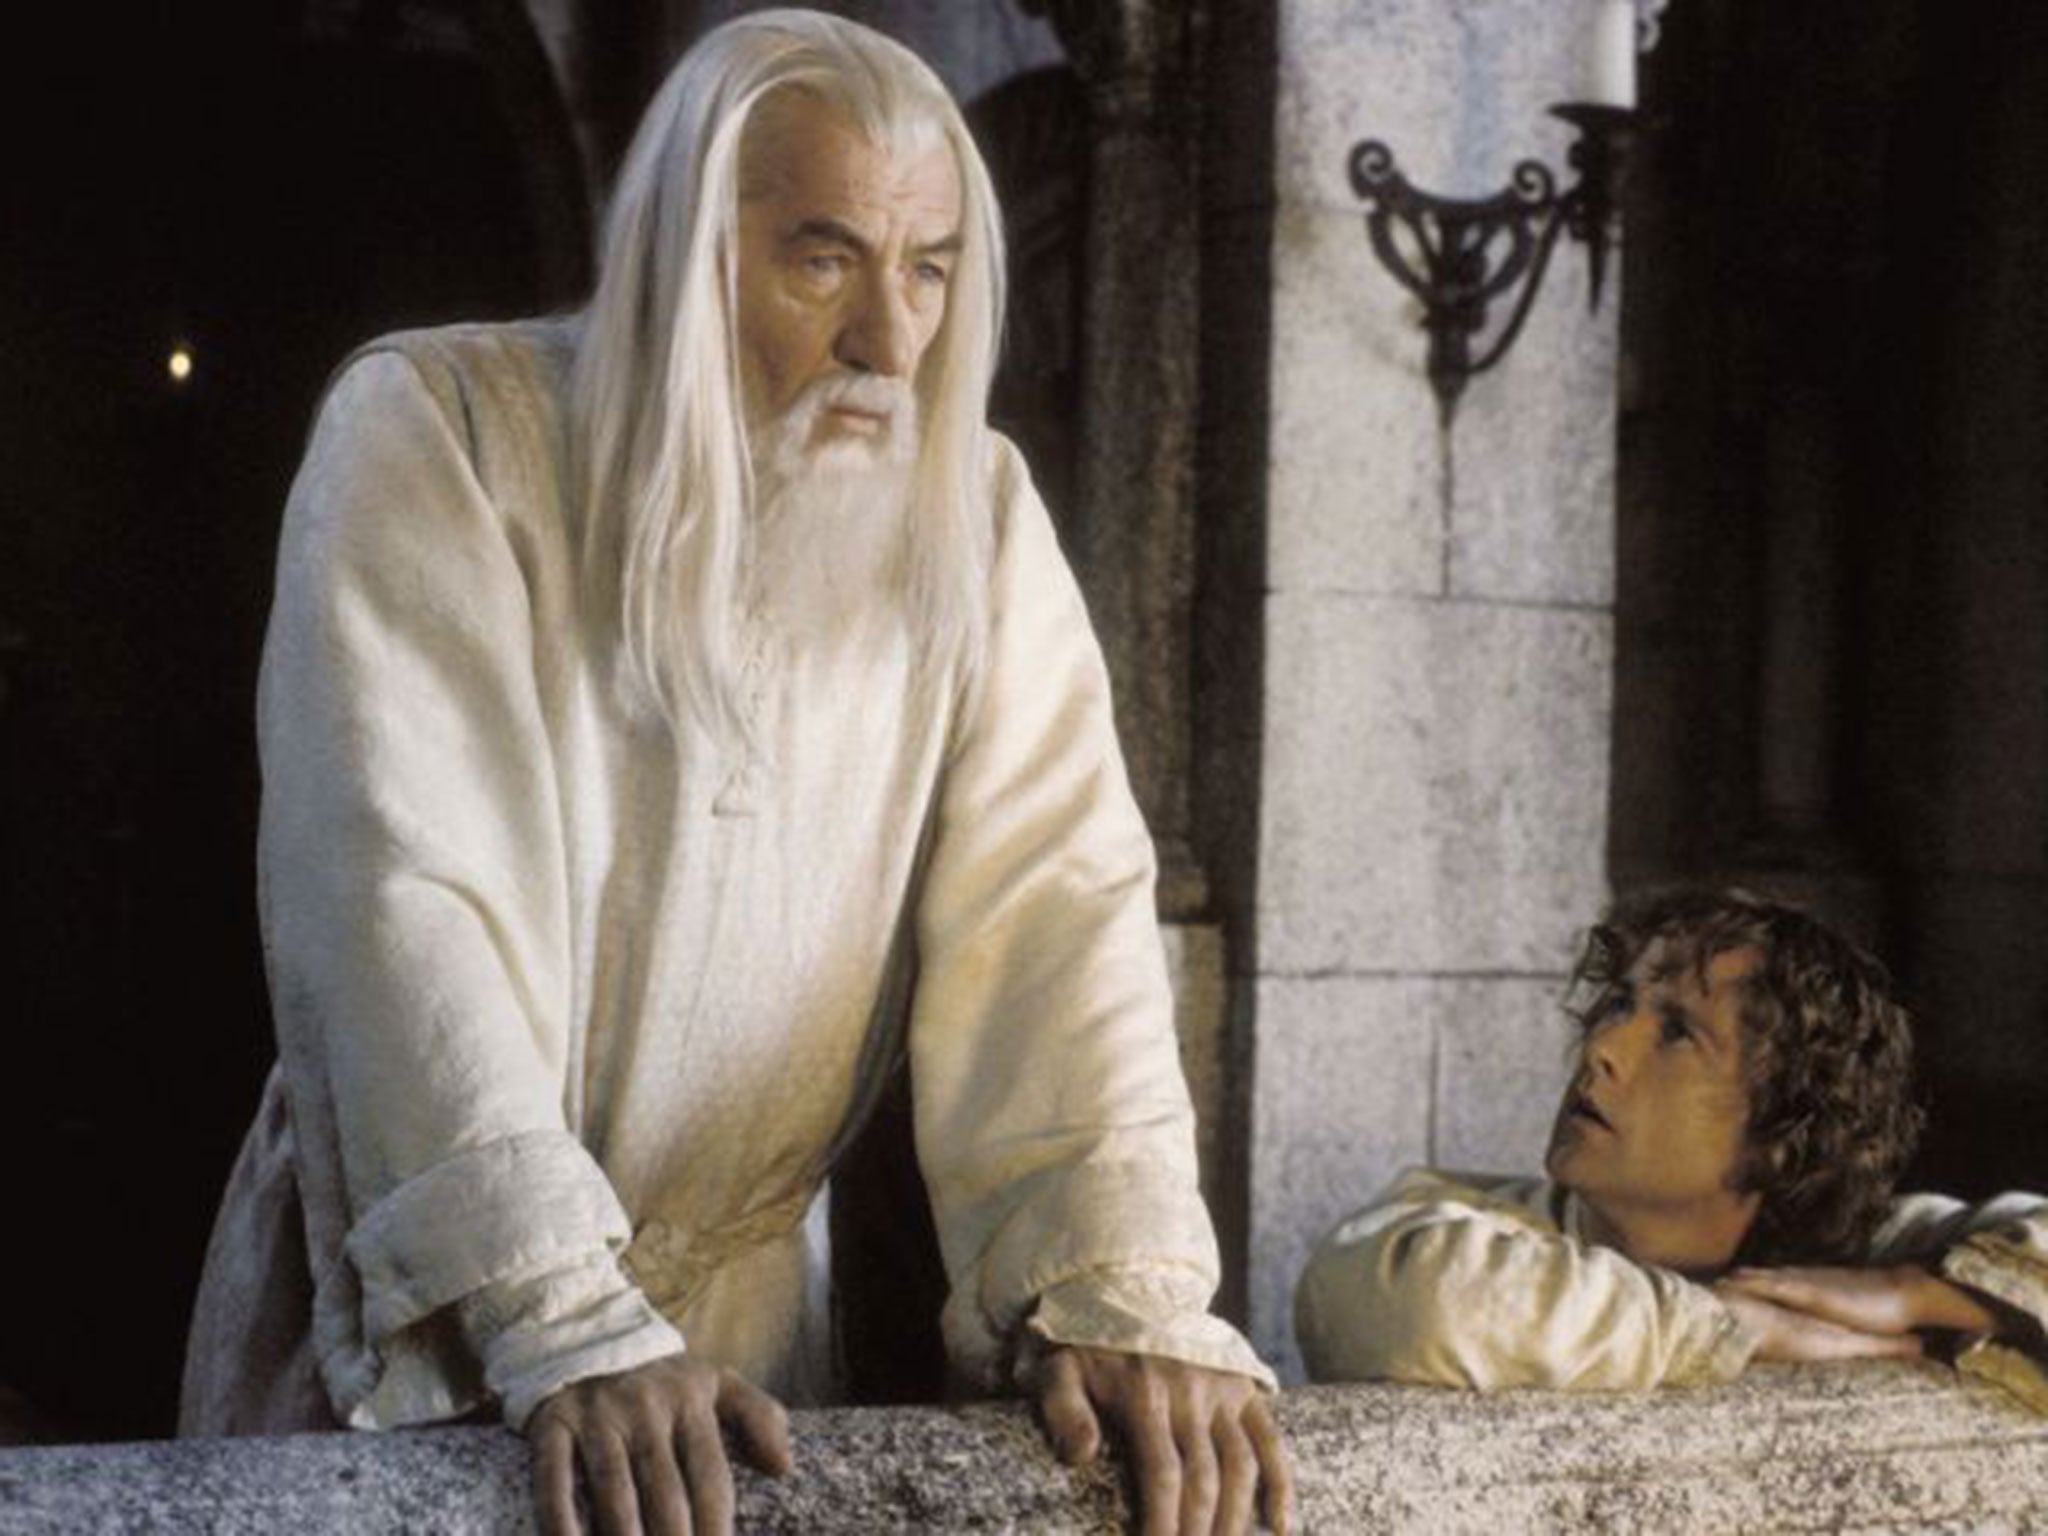 Sir Ian McKellen as Gandalf in the film adaptation of JRR Tolkien's The Lord of the Rings trilogy